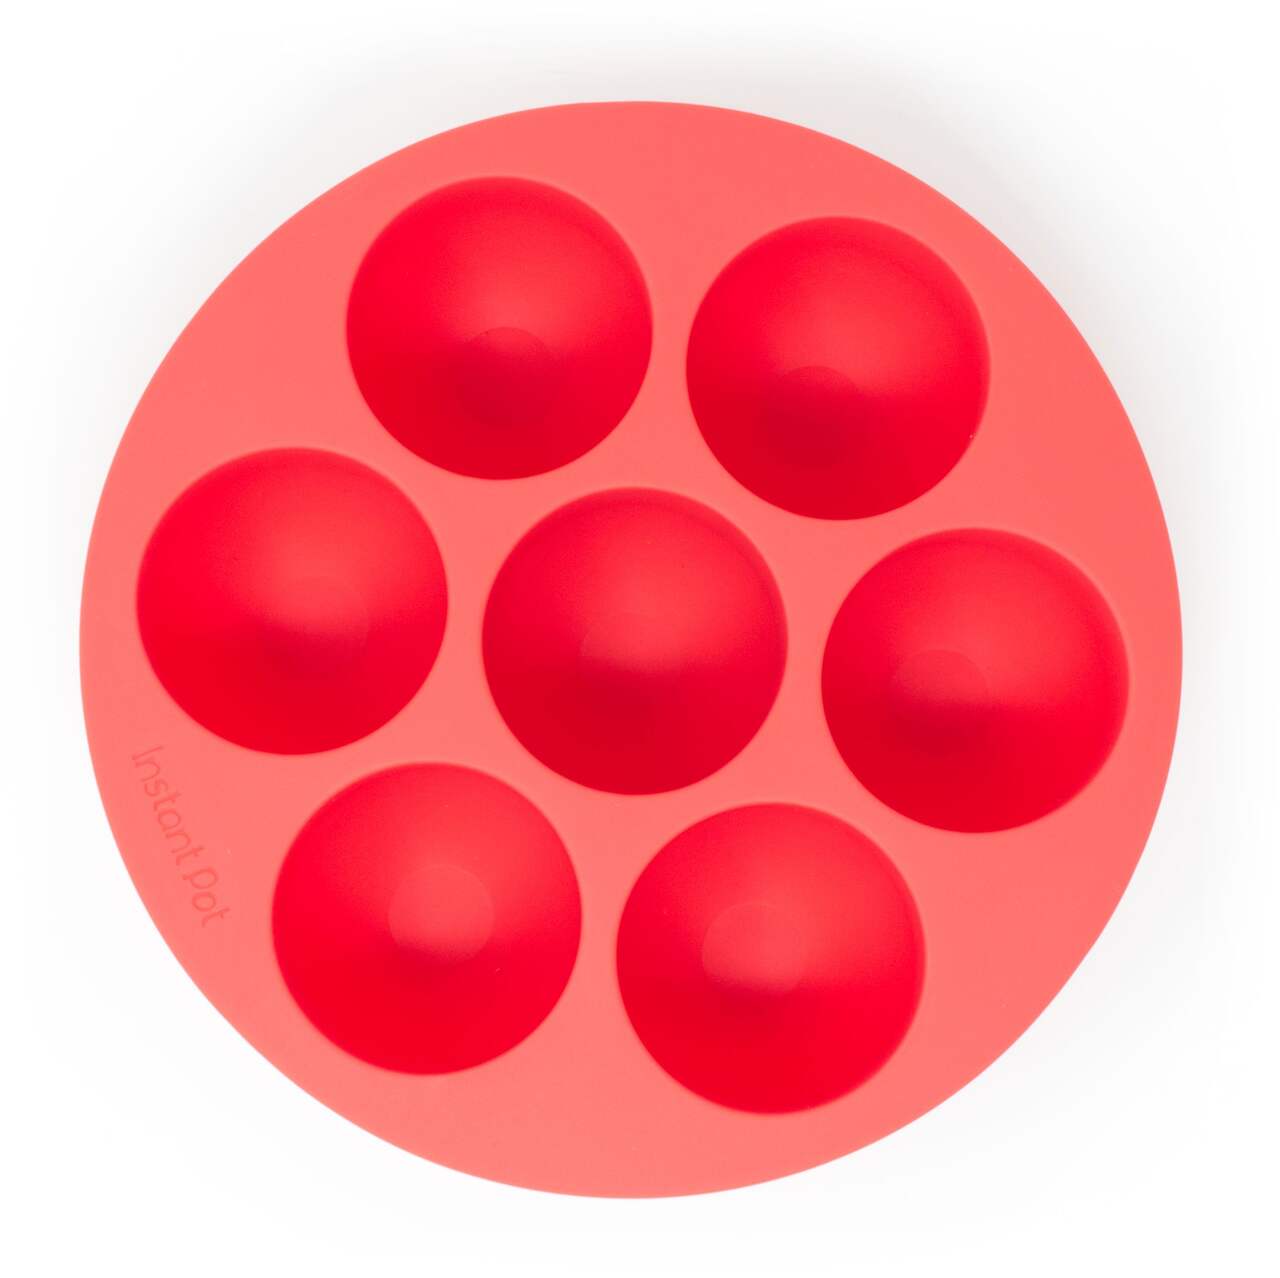 Instant Pot® Silicone Egg Bite Mold - Red, 1 ct - Fred Meyer